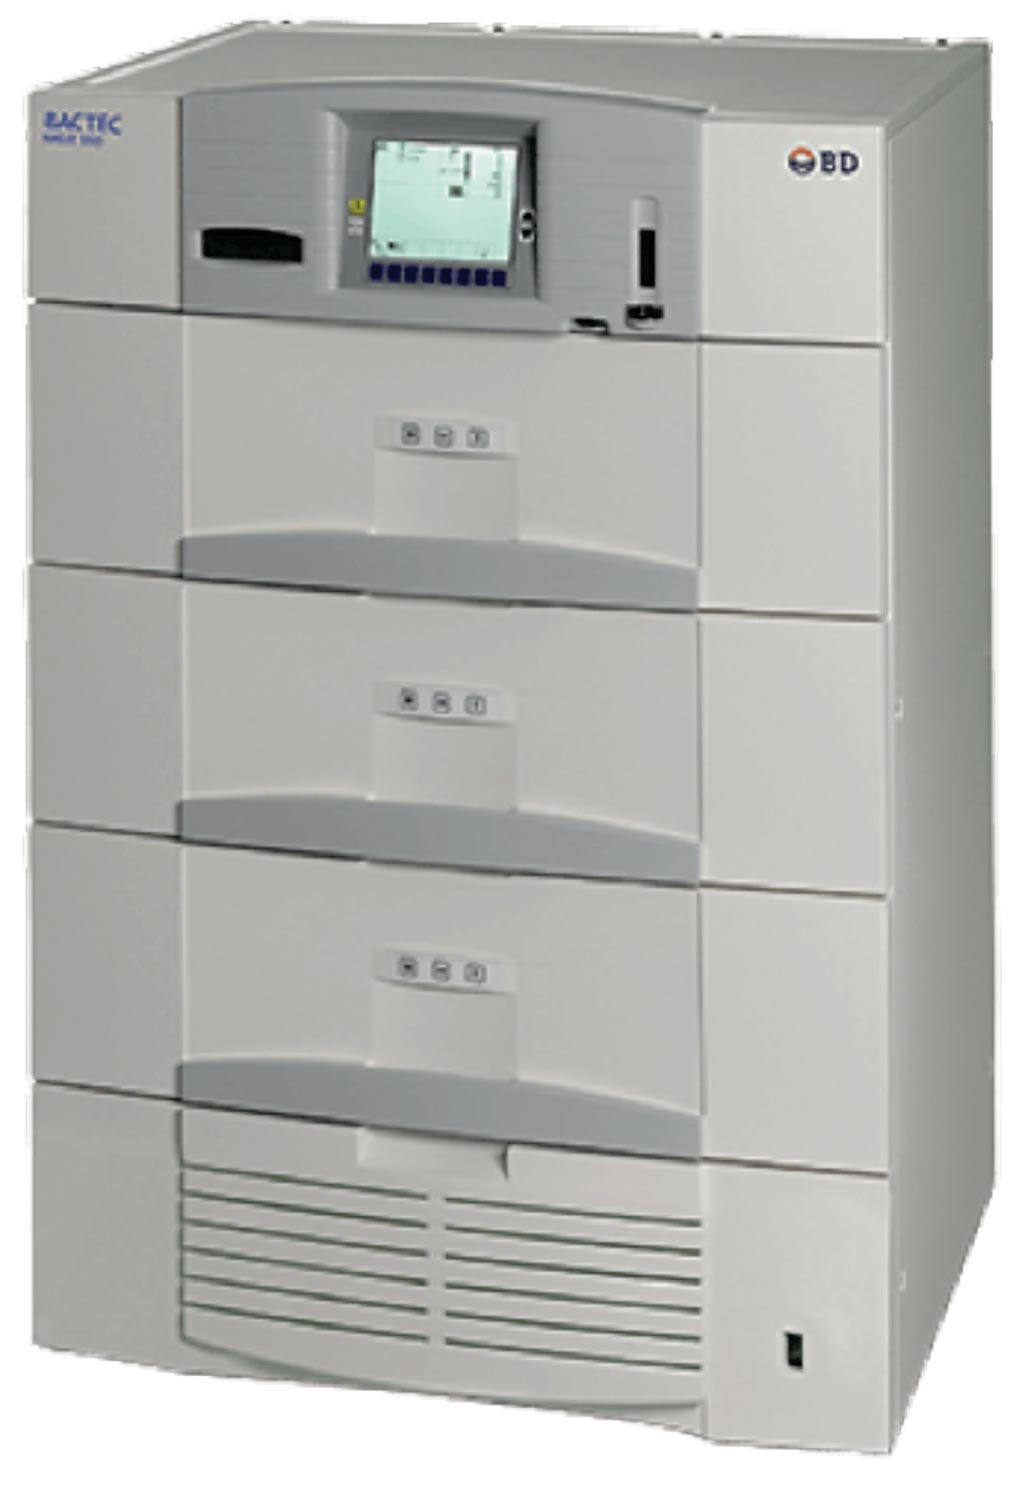 Image: The BD BACTEC MGIT automated mycobacterial detection system is a fully automated solution for mycobacterial liquid culture and susceptibility testing (Photo courtesy of Becton Dickinson).